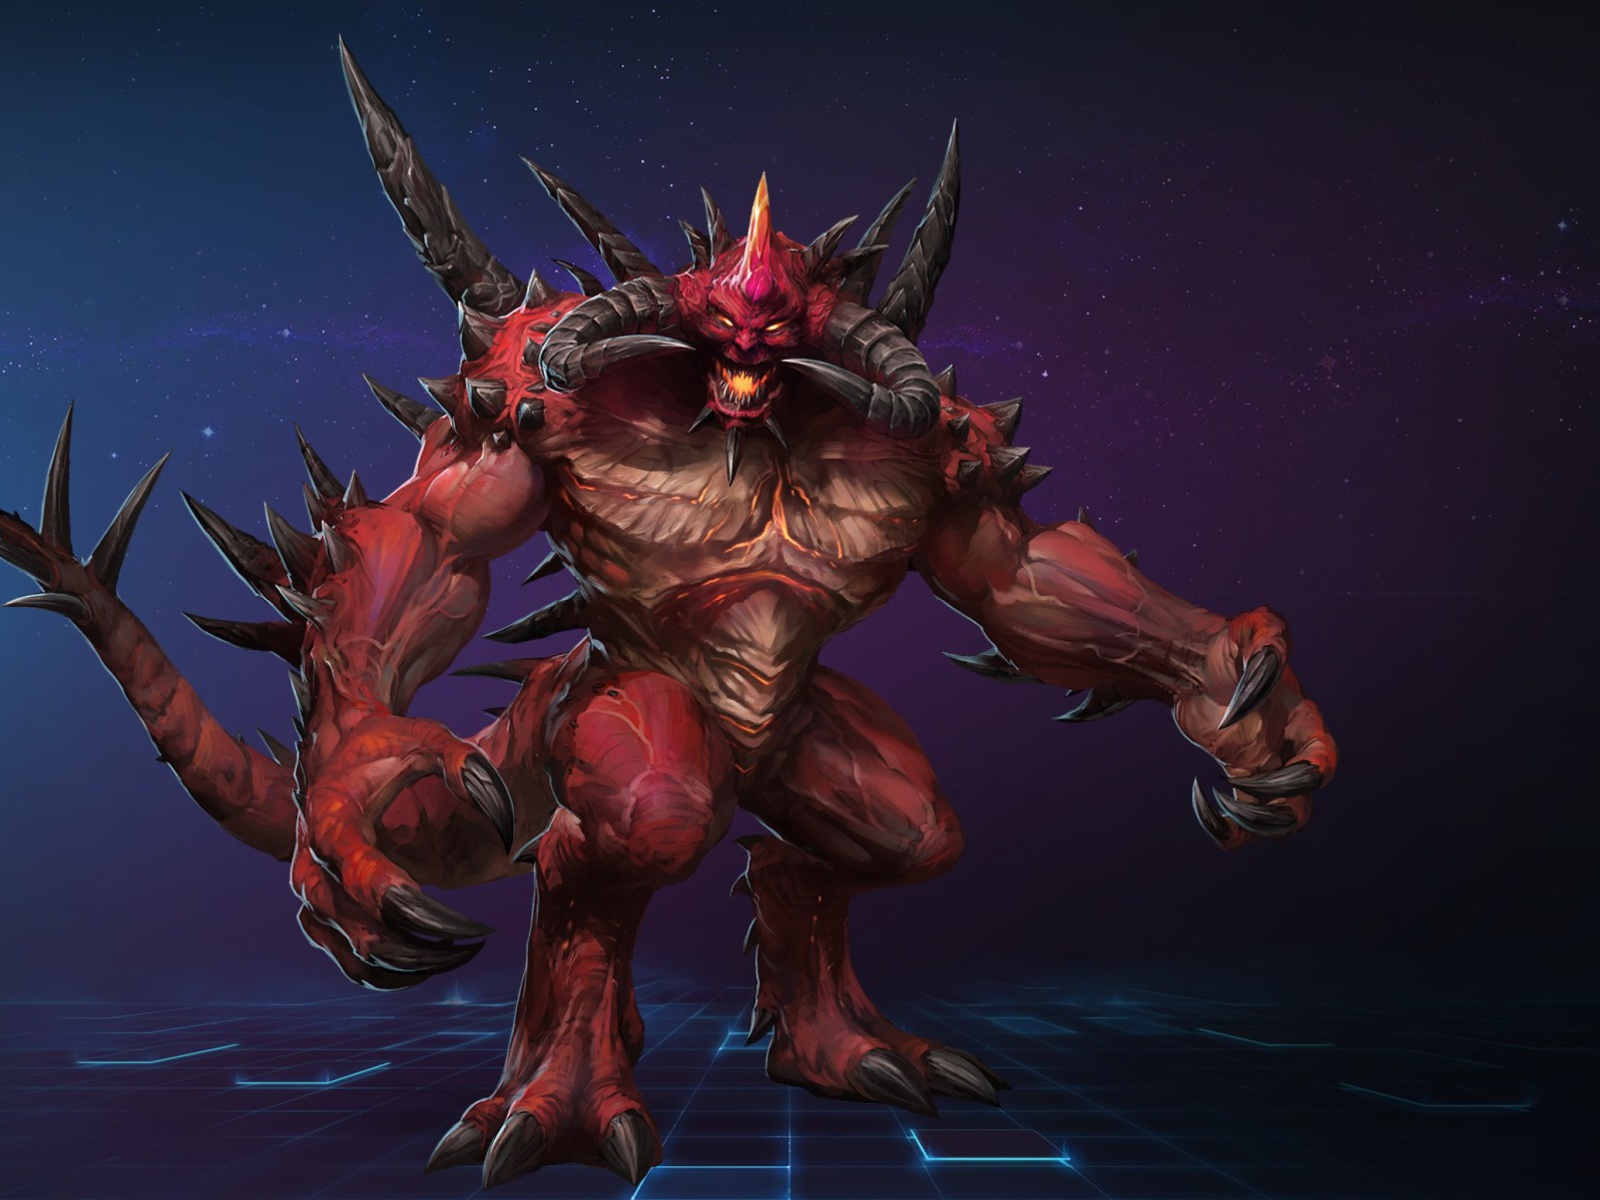 Sfondi Heroes of the Storm Battle Video Game 1600x1200